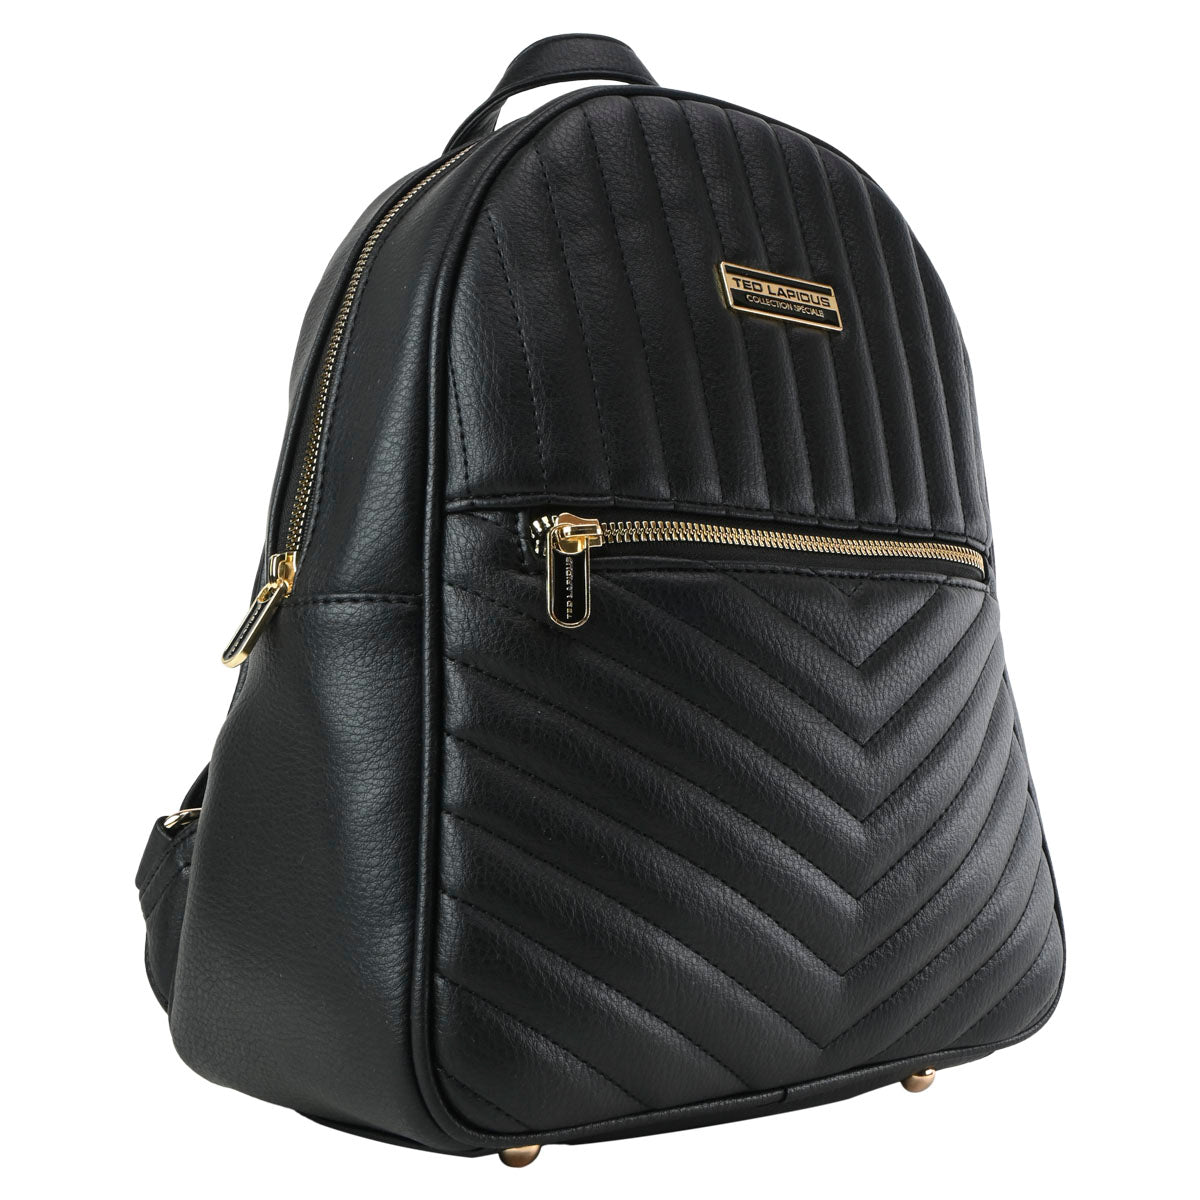 Bacpack Unicolor Para Mujer Color Negro Ted Lapidus